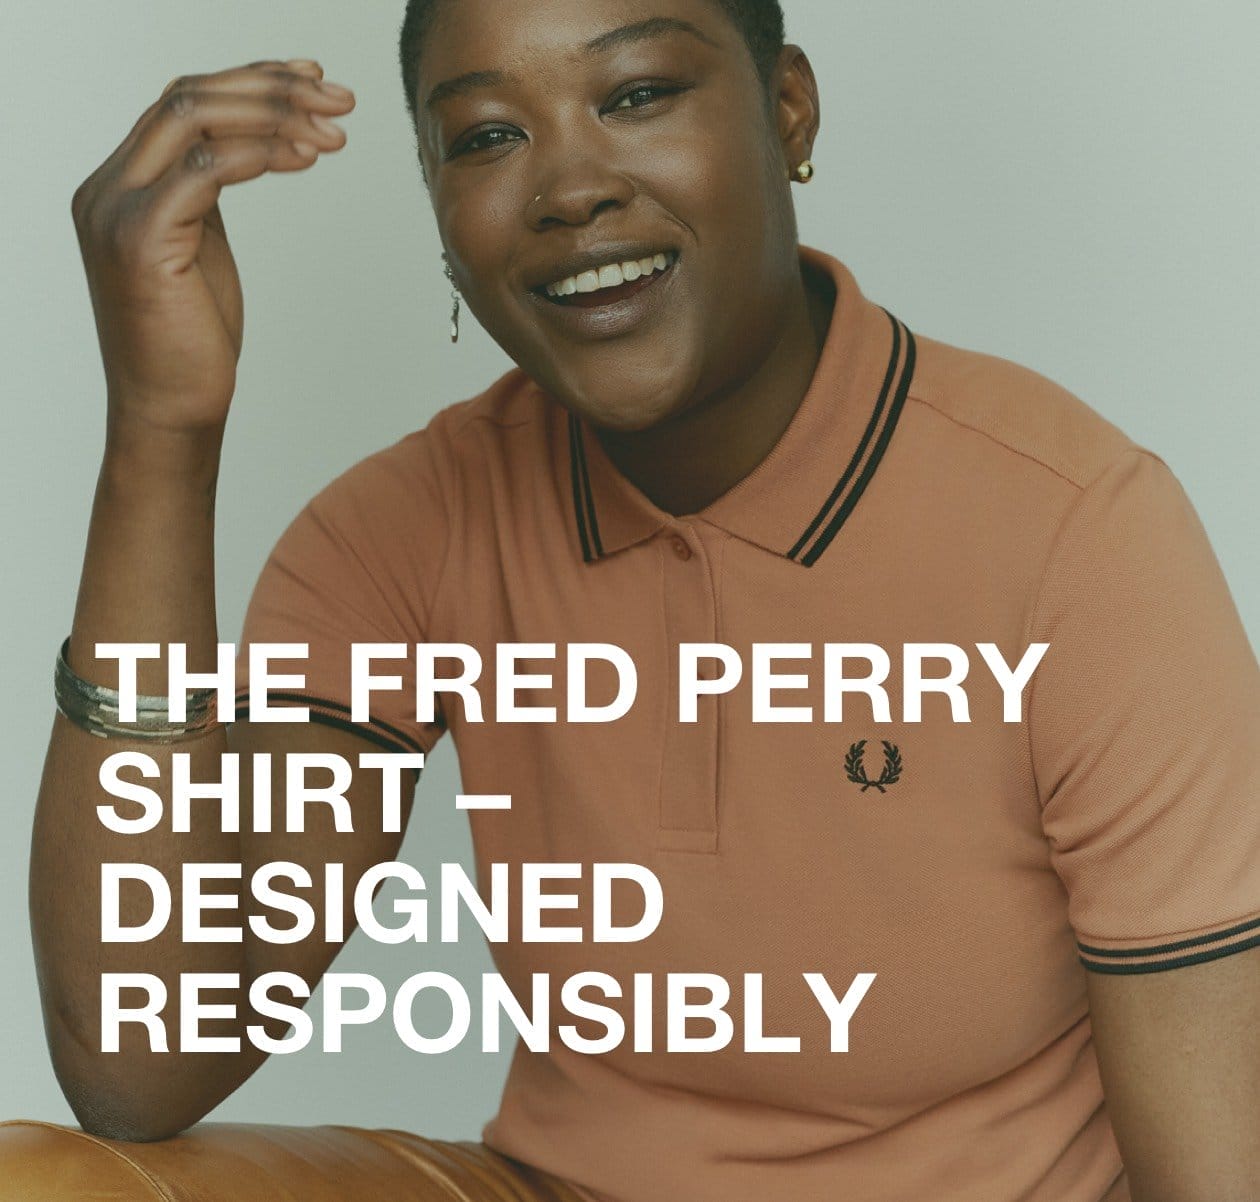 The Fred Perry Shirt - Designed Responsibly